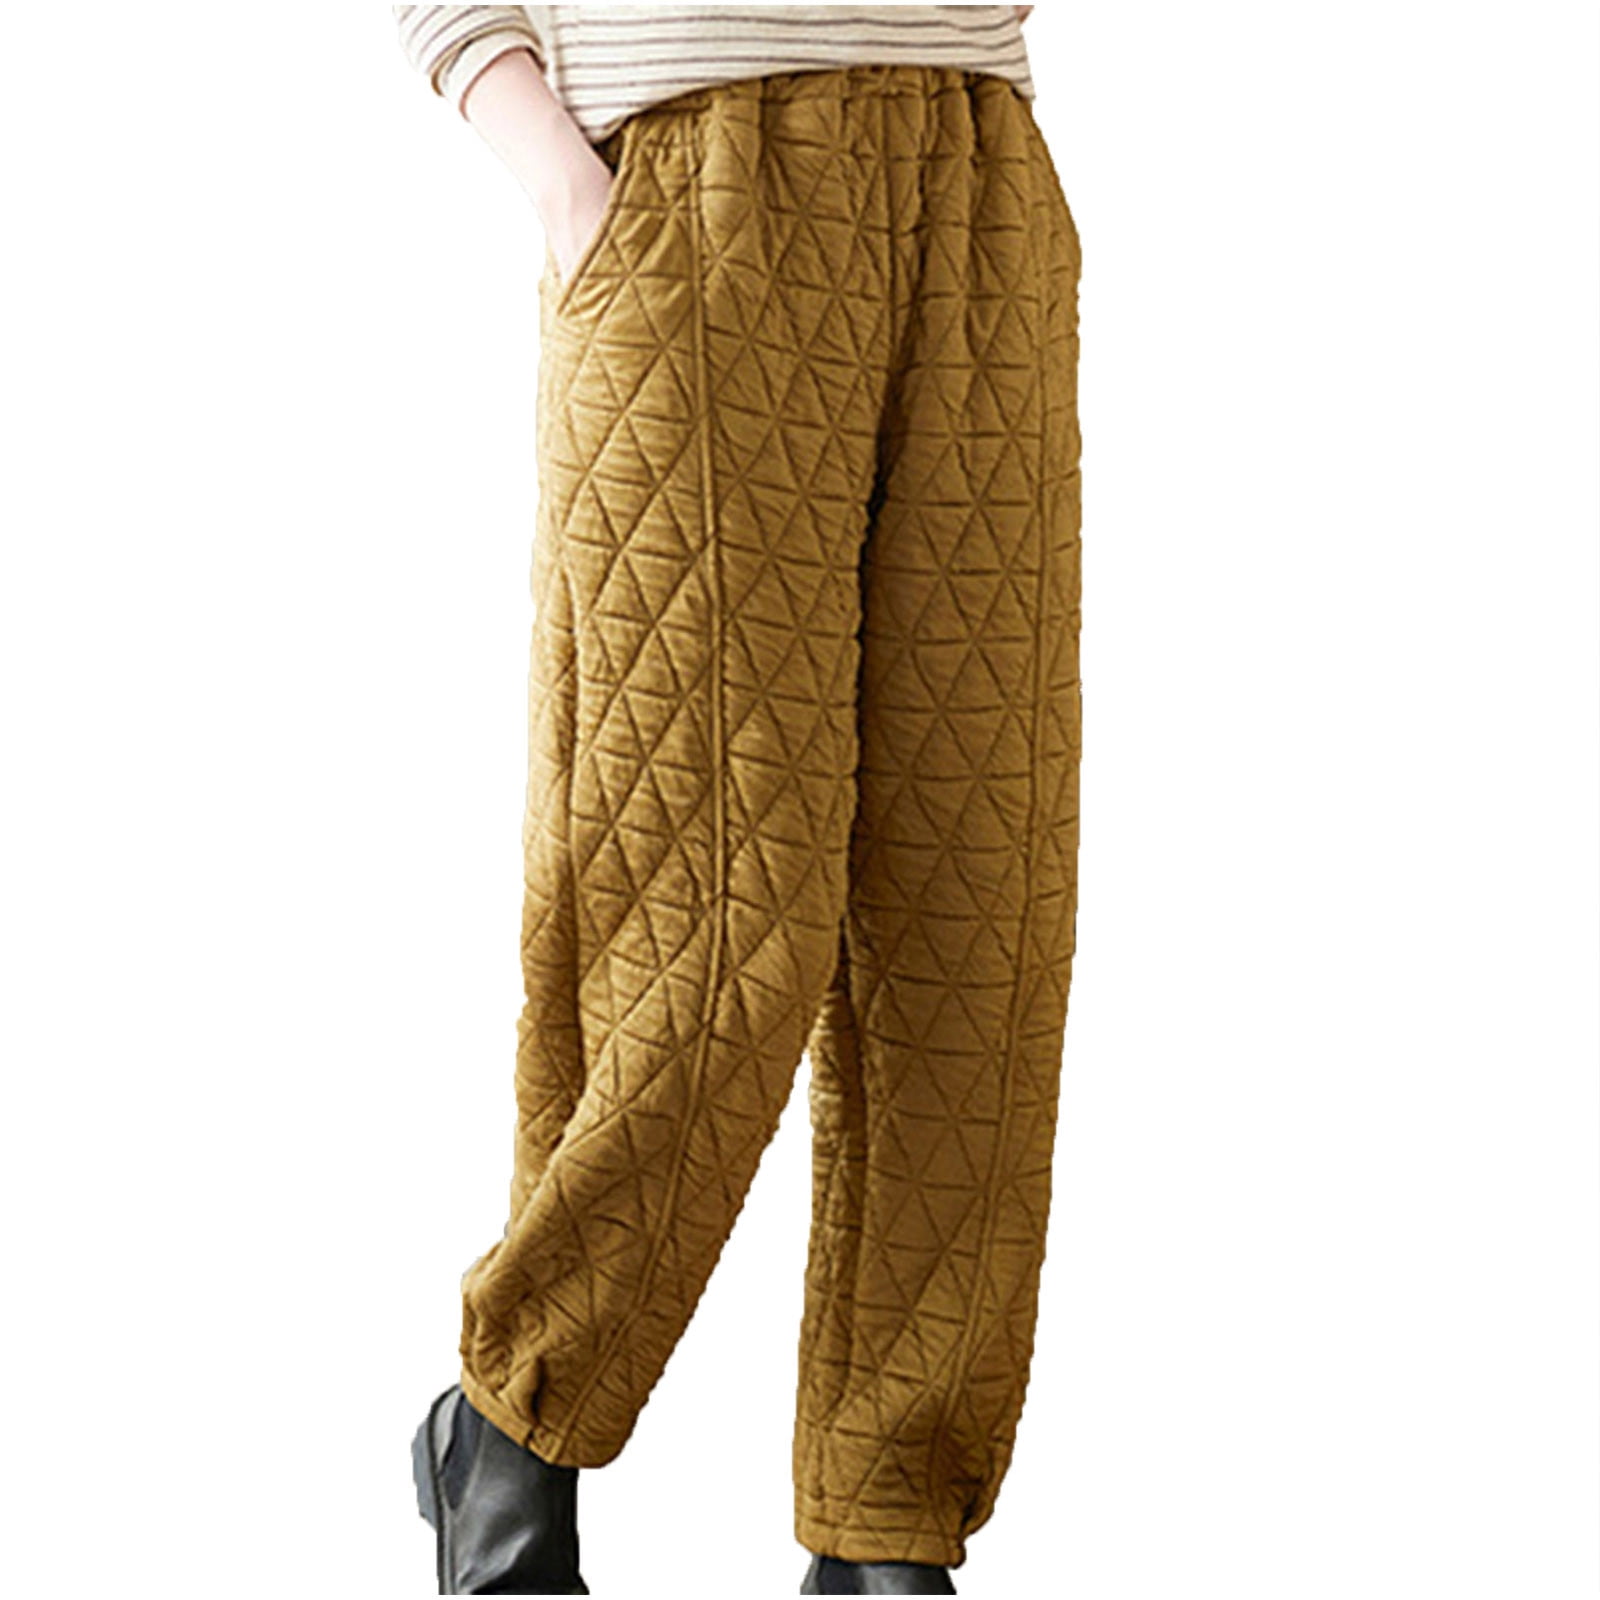 Red Quilted Pants, Winter Green Trousers, Warm Cotton Pants, Woman